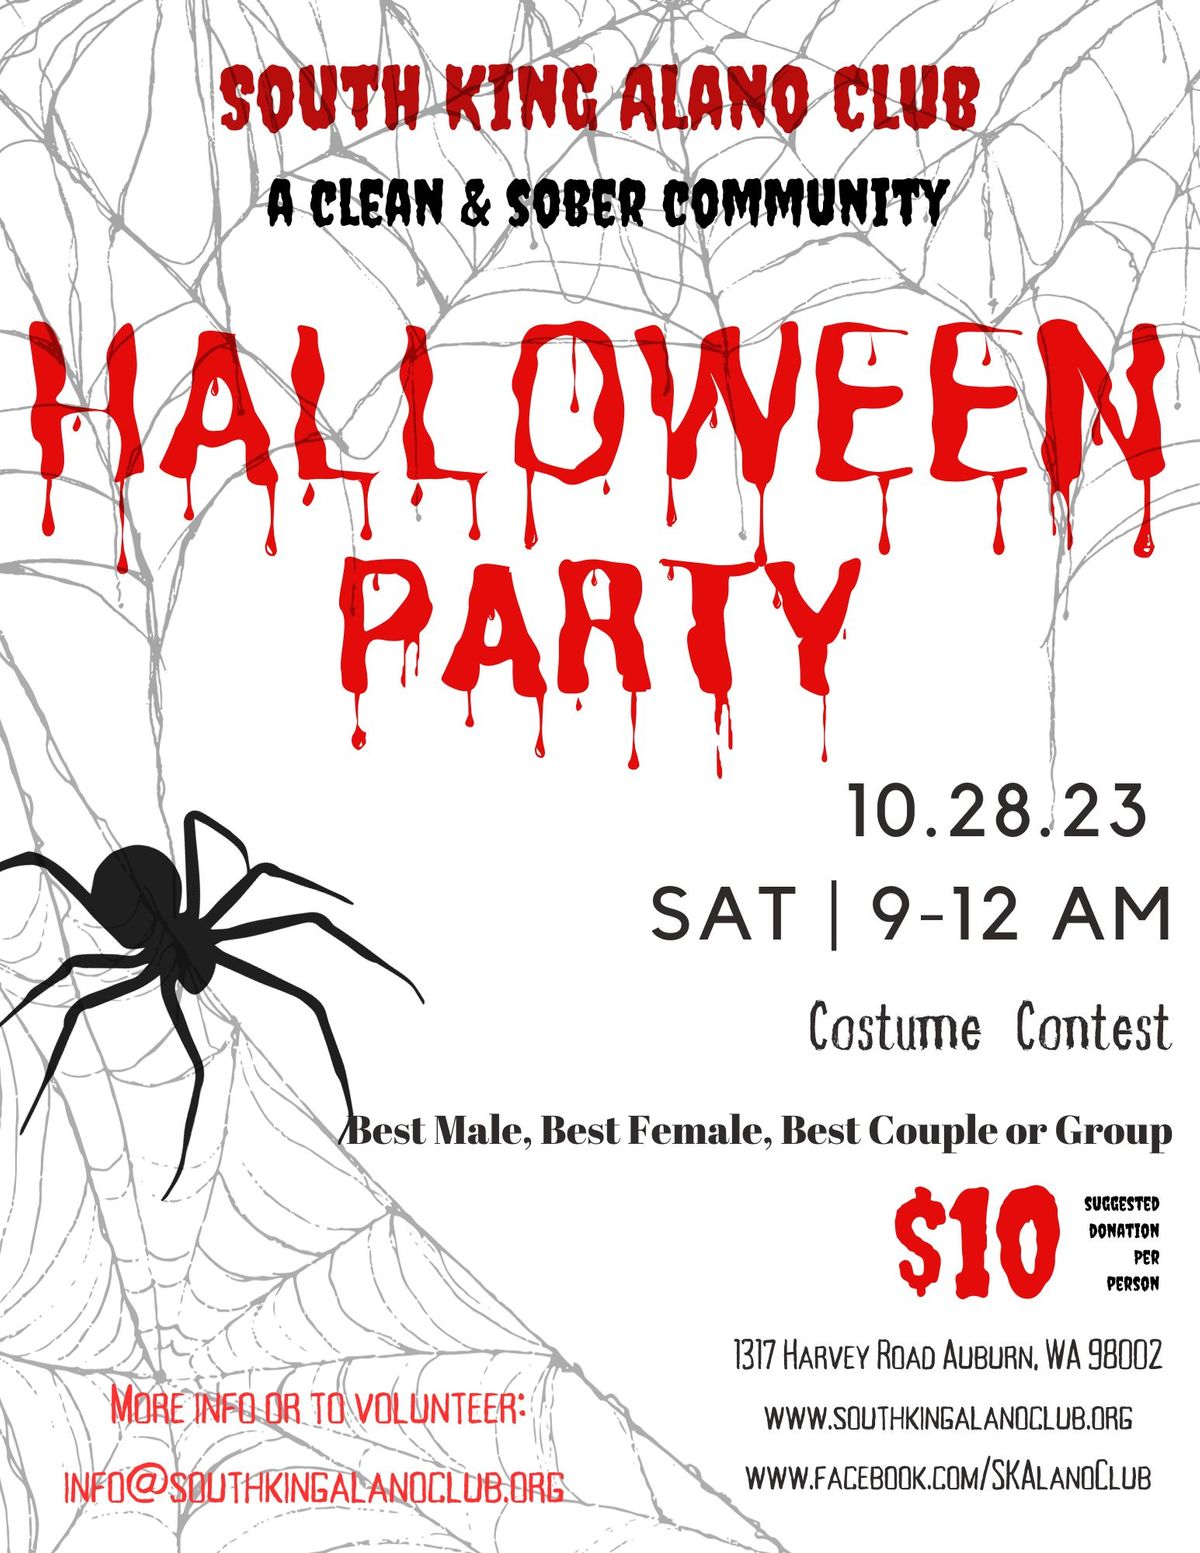 2023 Halloween Party flyer - $10 suggested donation , 10-28-23.jpg